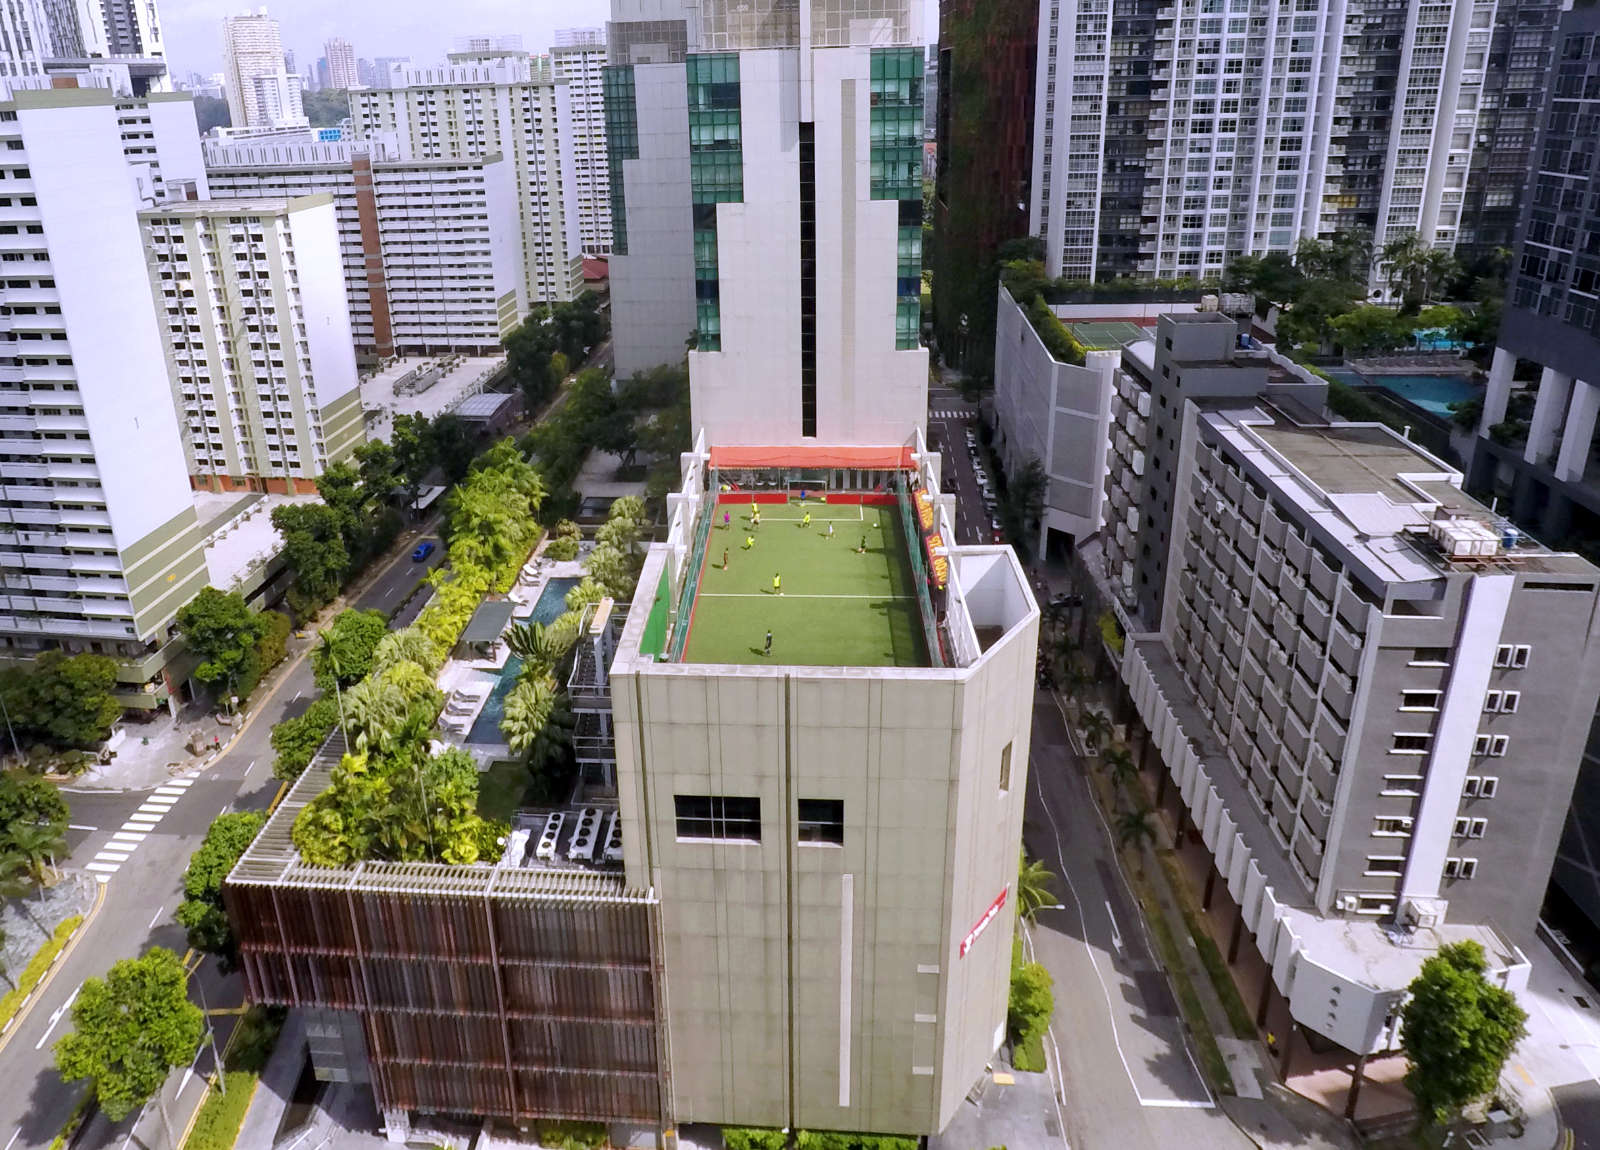 Rooftop Soccer - Mini-Pitch on a rooftop